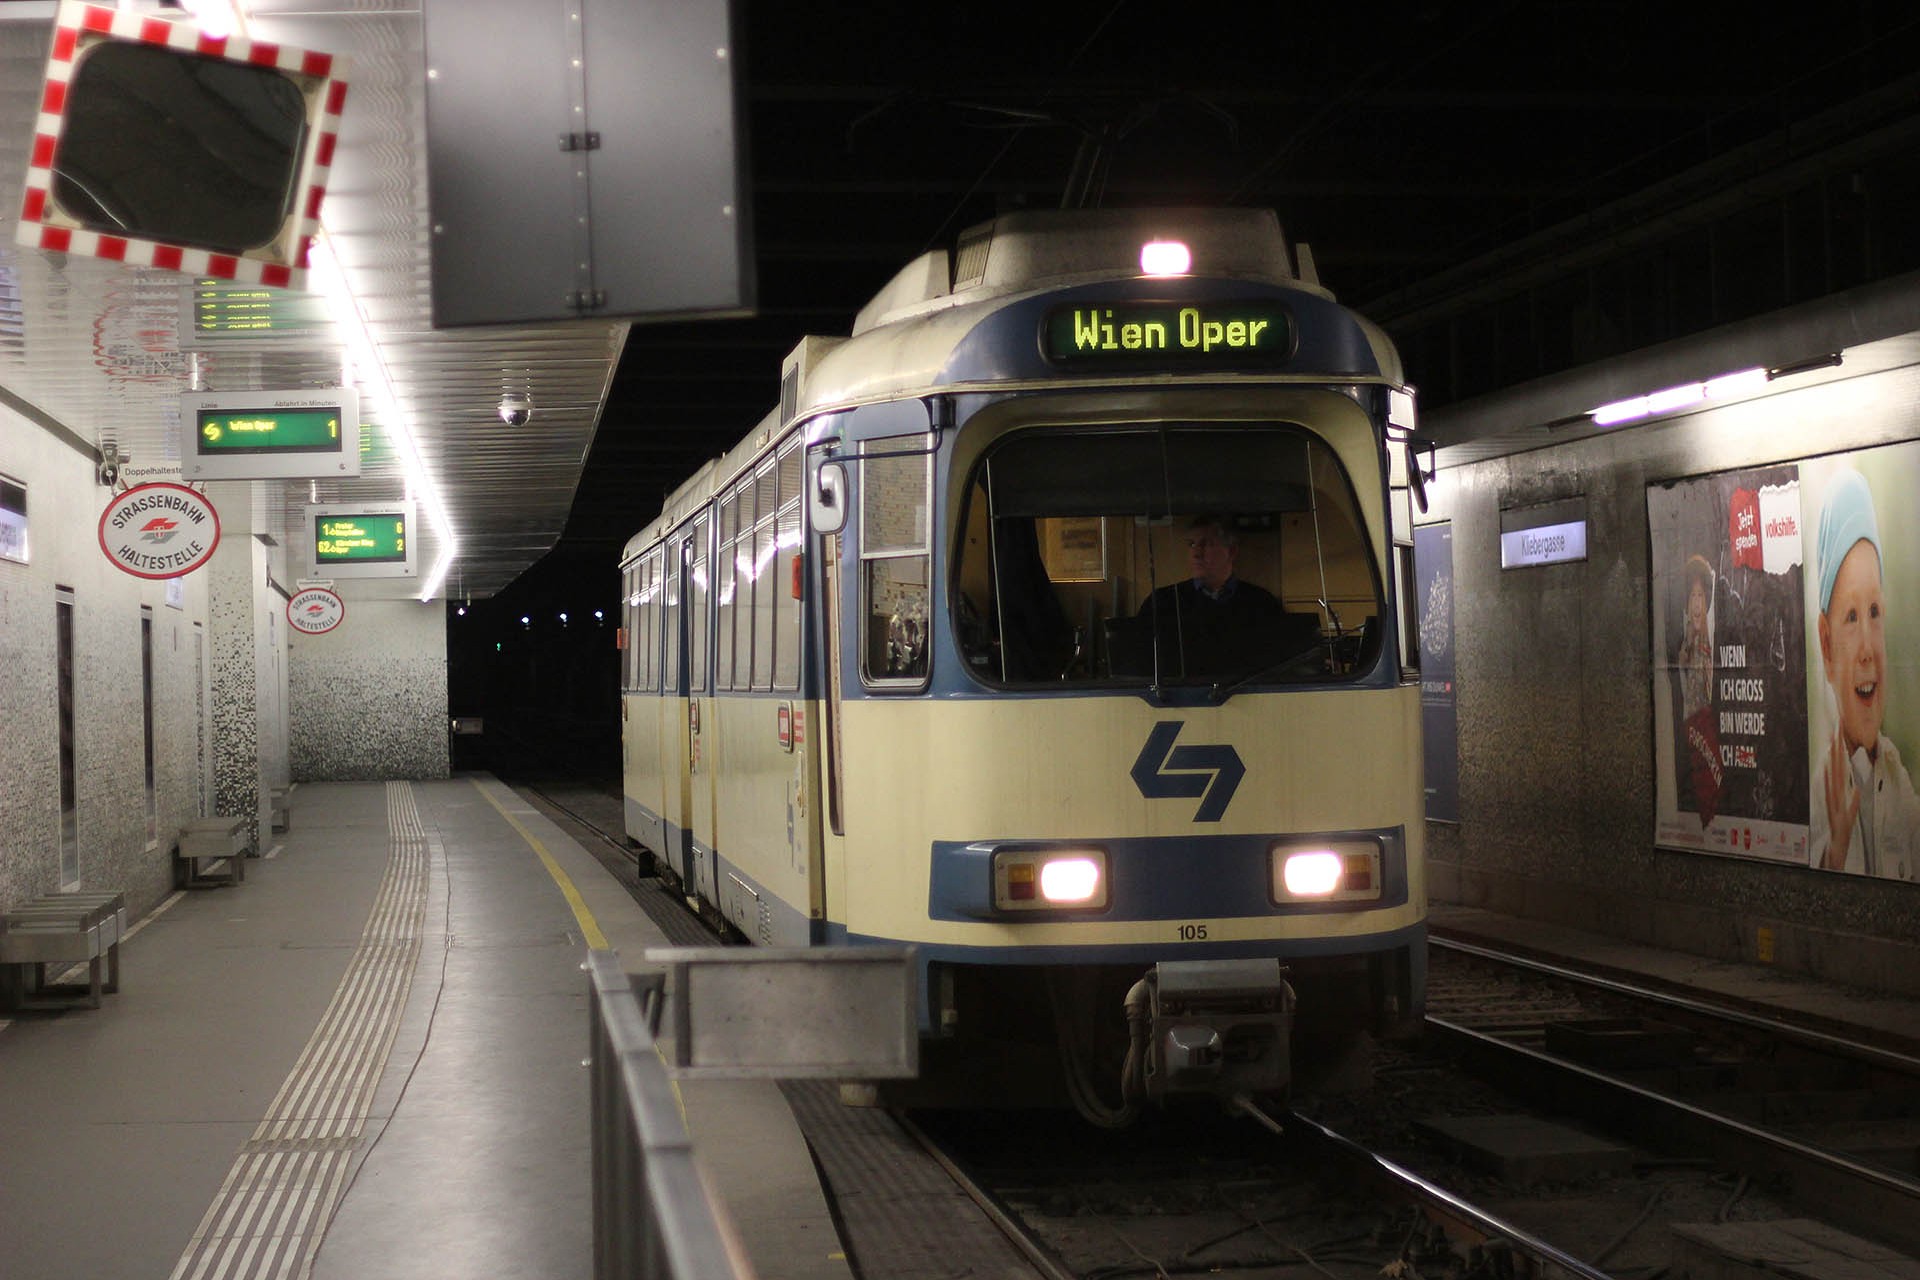 WLB 105 Die Badner Bahn fährt auch in der Ustrab. The WLB trams also run below surface with Vienna's tram lines 1, 6, 18 and 62.